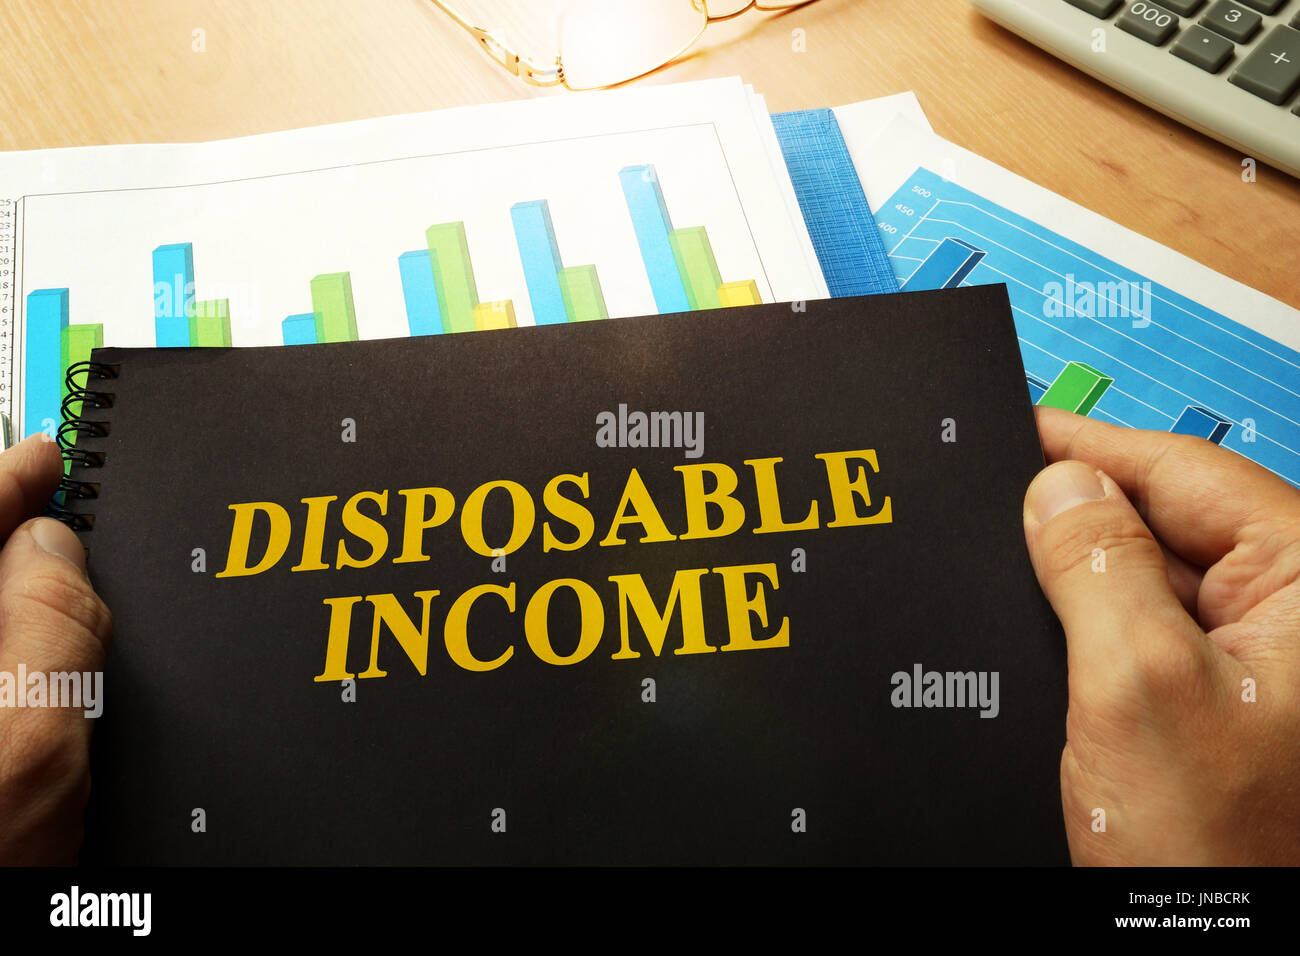 Disposable income written on a front of note. Stock Photo